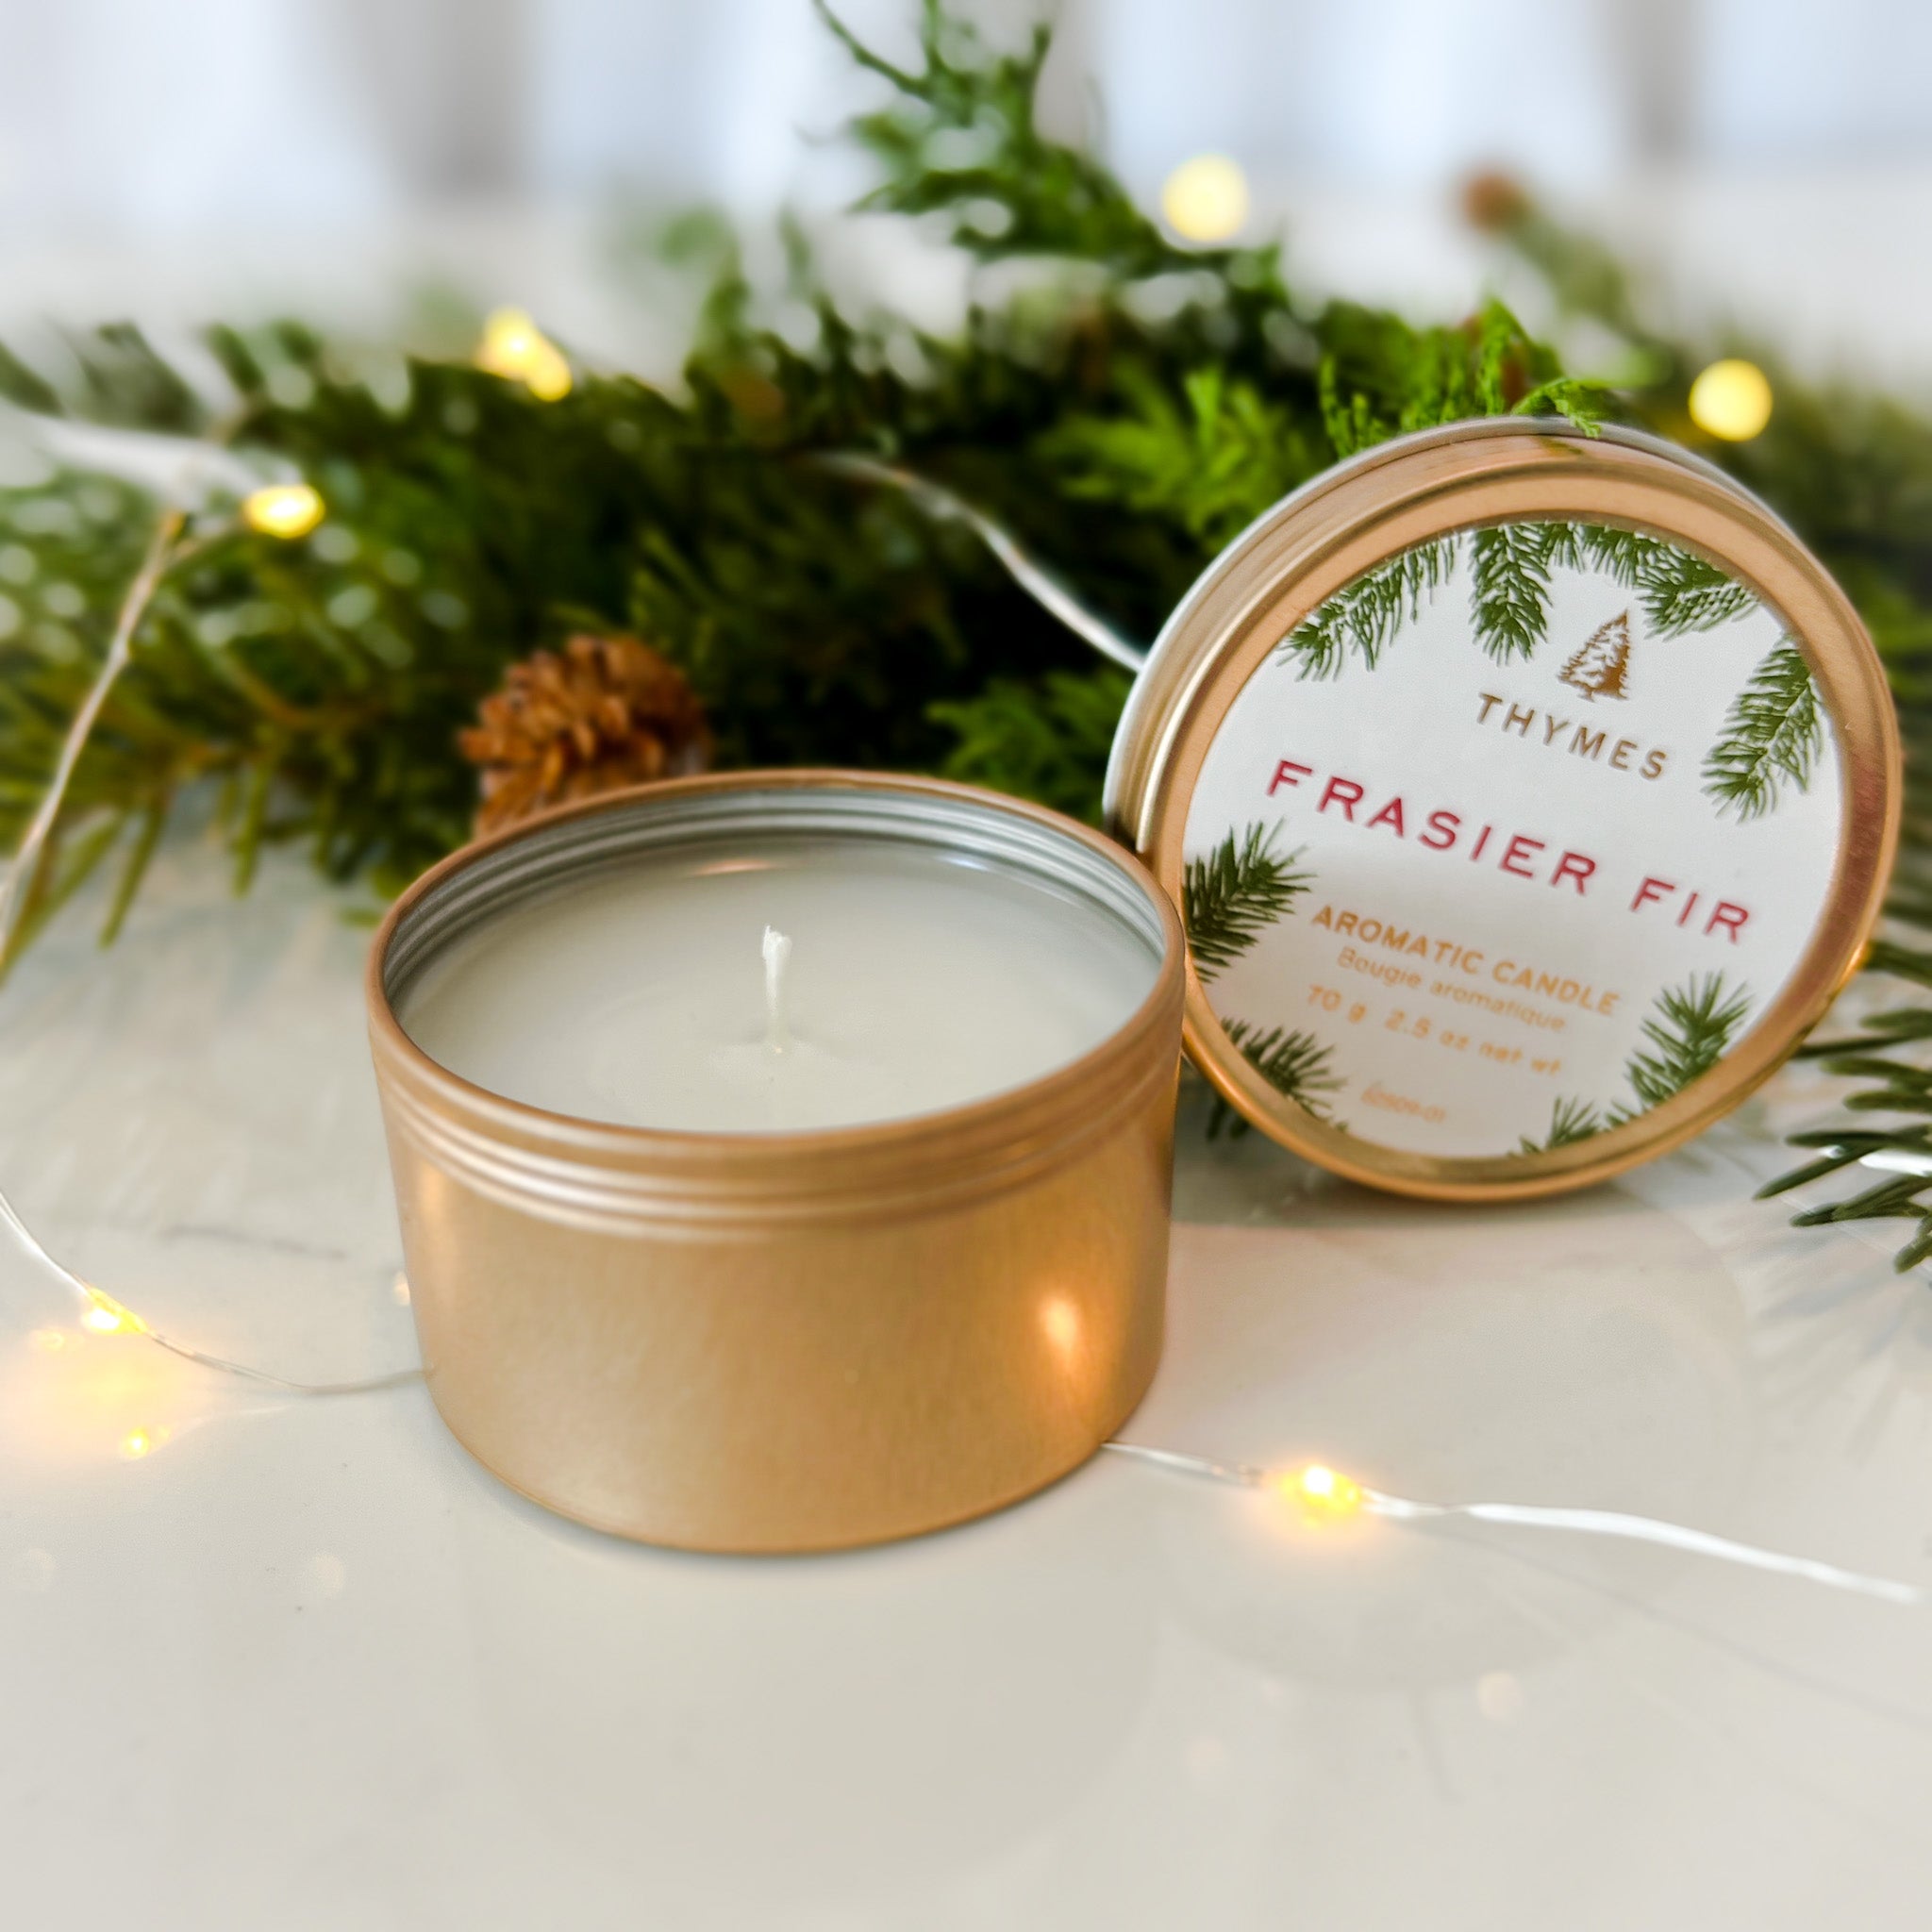 FRASIER FIR TRAVEL TIN CANDLE by THYMES – FAN TAN HOME & STYLE